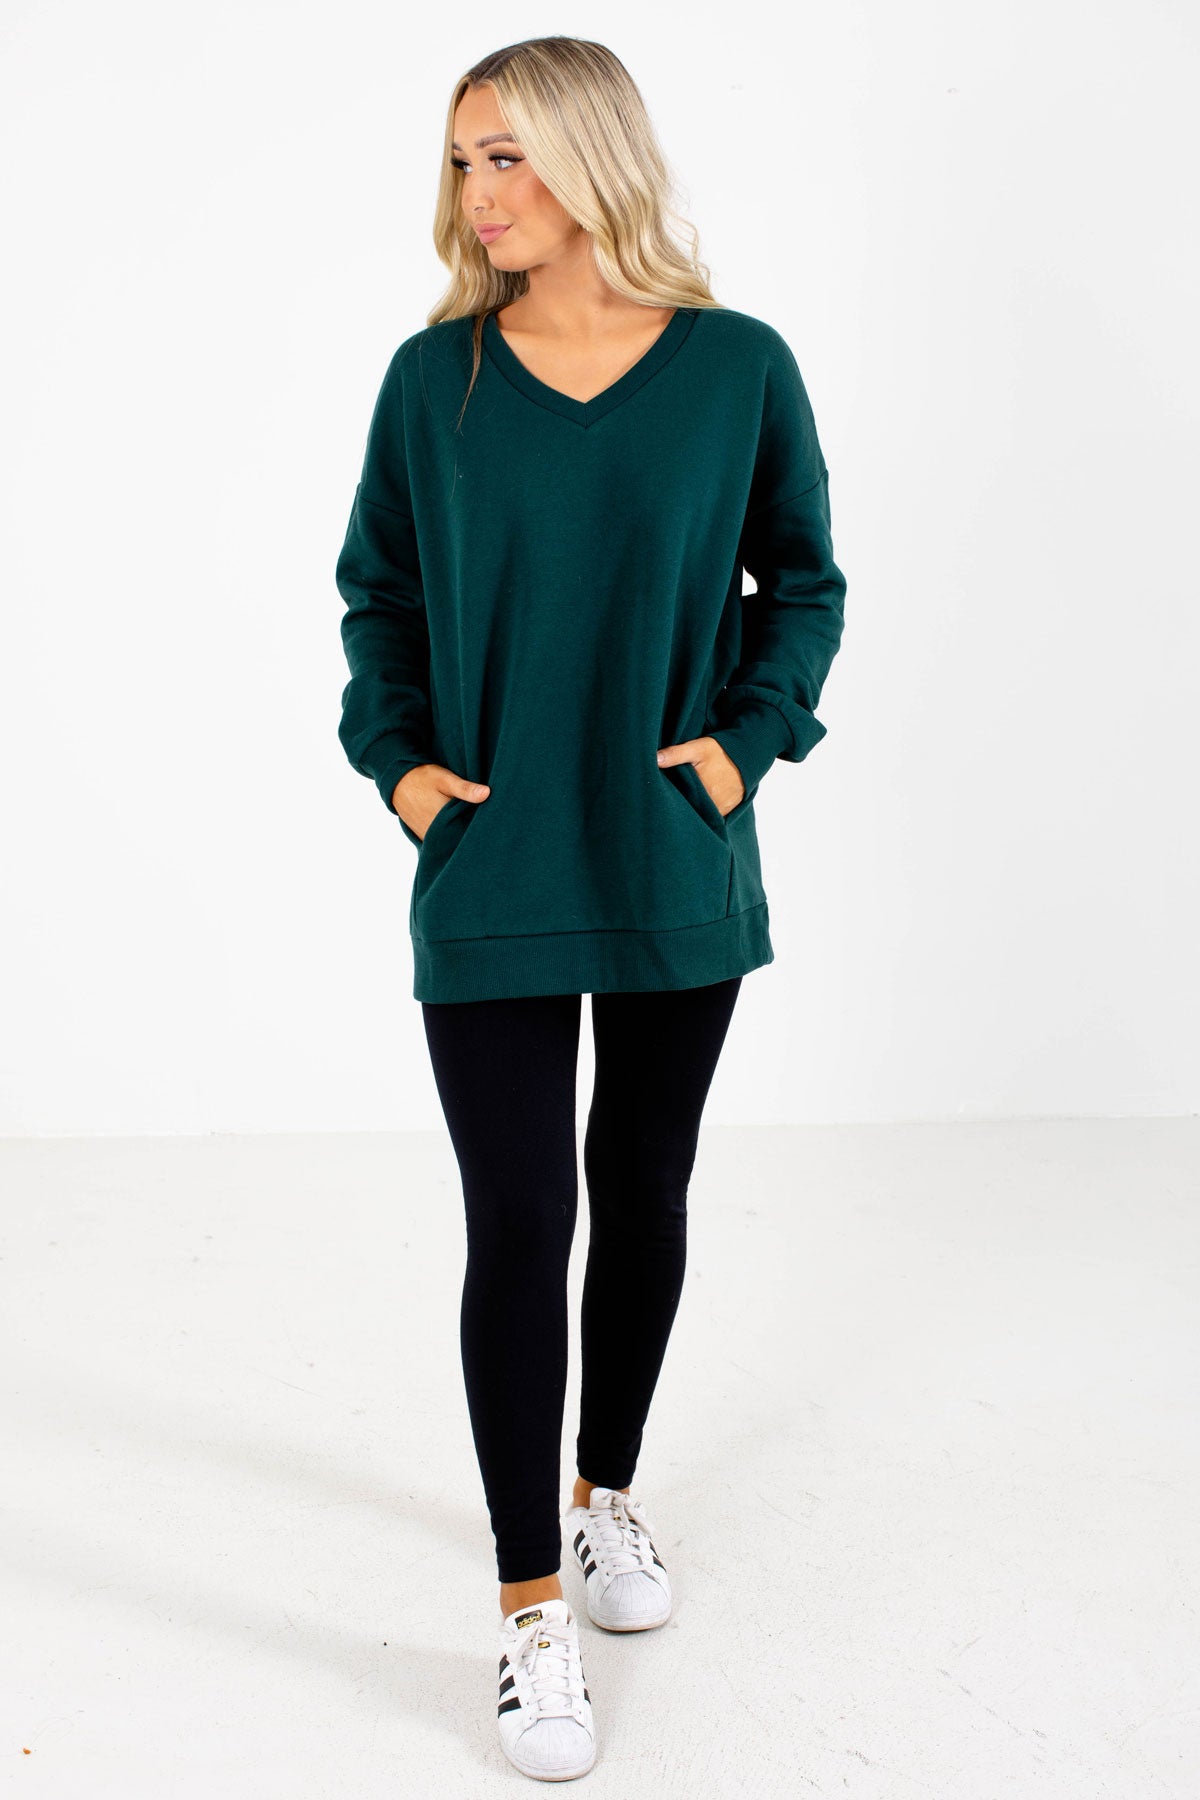 Women's Green Pullover Sweater with Pockets Women's Online Boutique